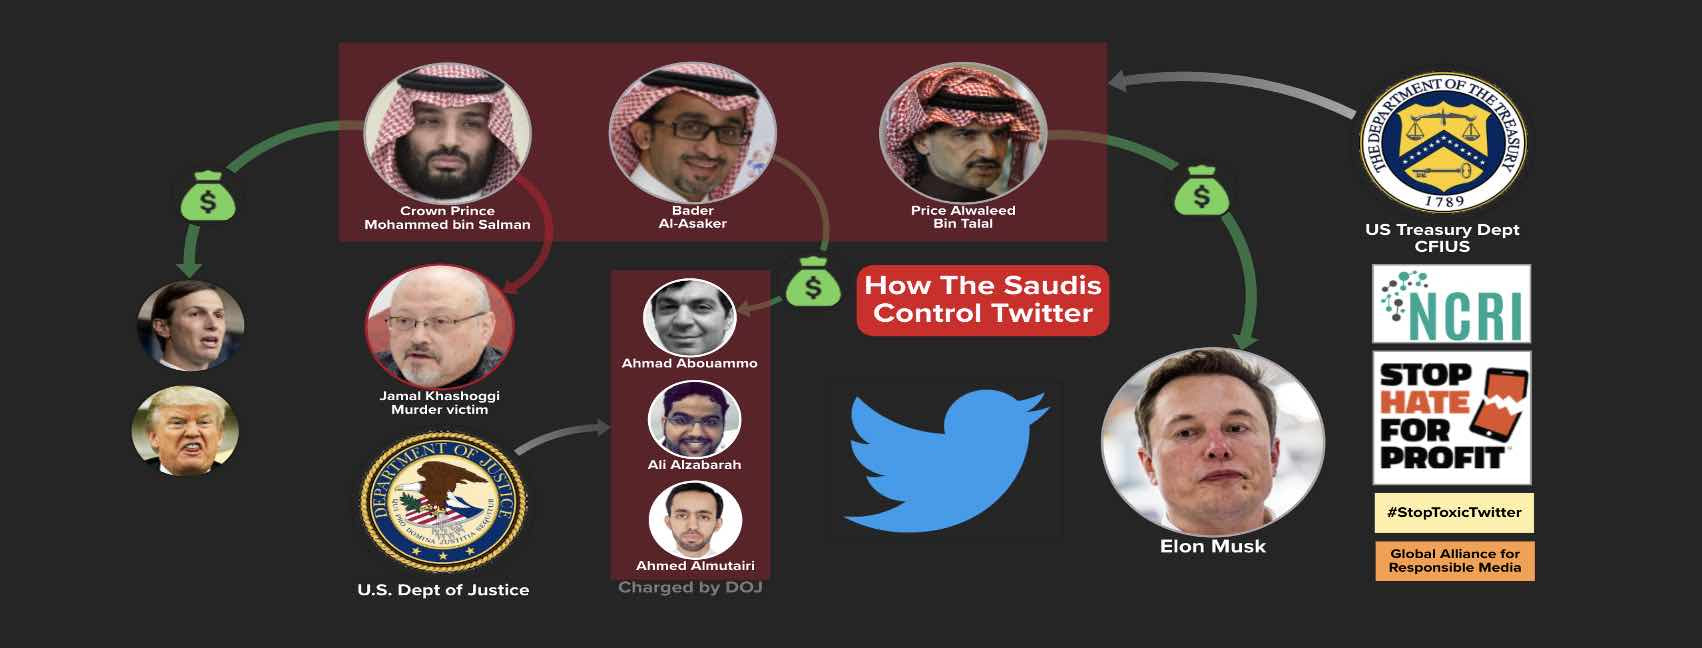 Follow the money to see how the Saudis control Twitter